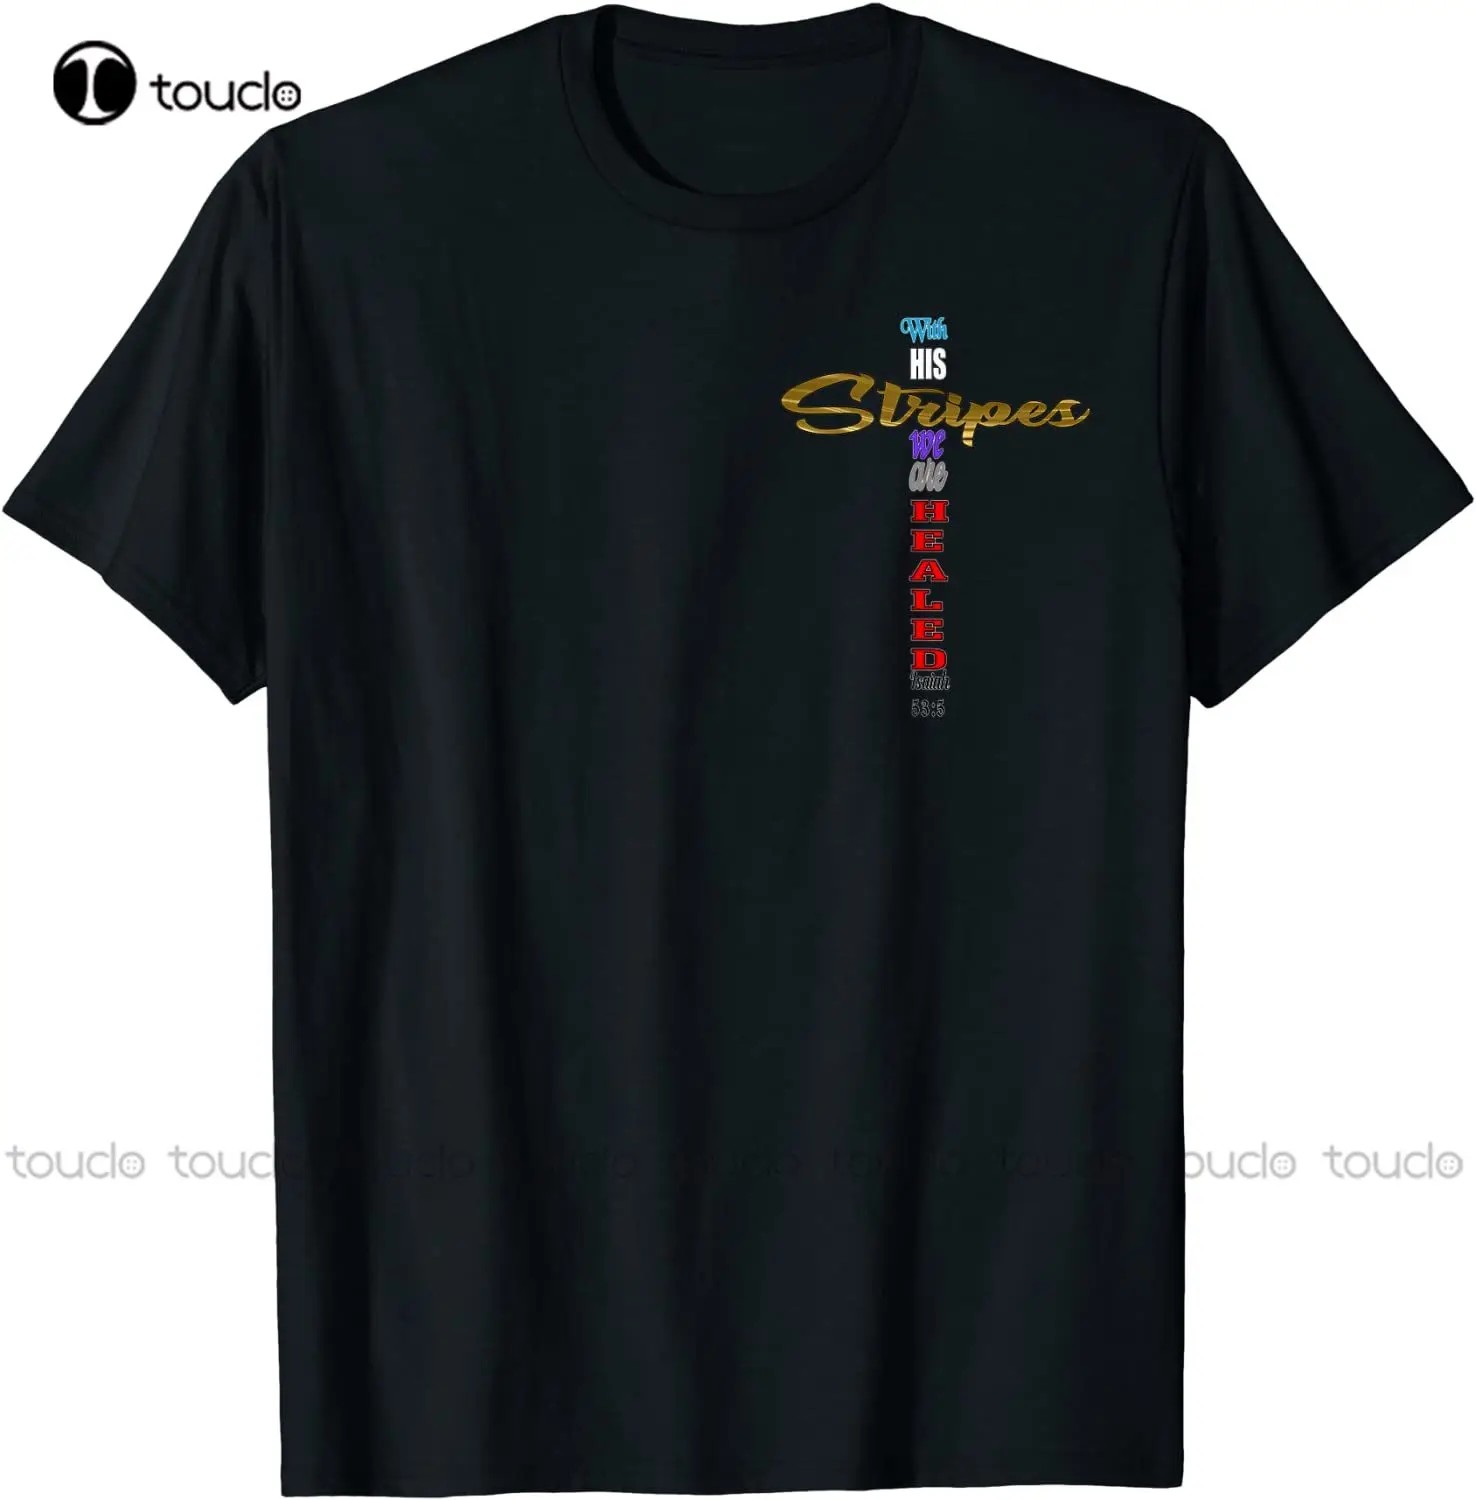 

New With His Stripes We Are Healed Isaiah 53:5 Jesus Cross T-Shirt Tee Shirt